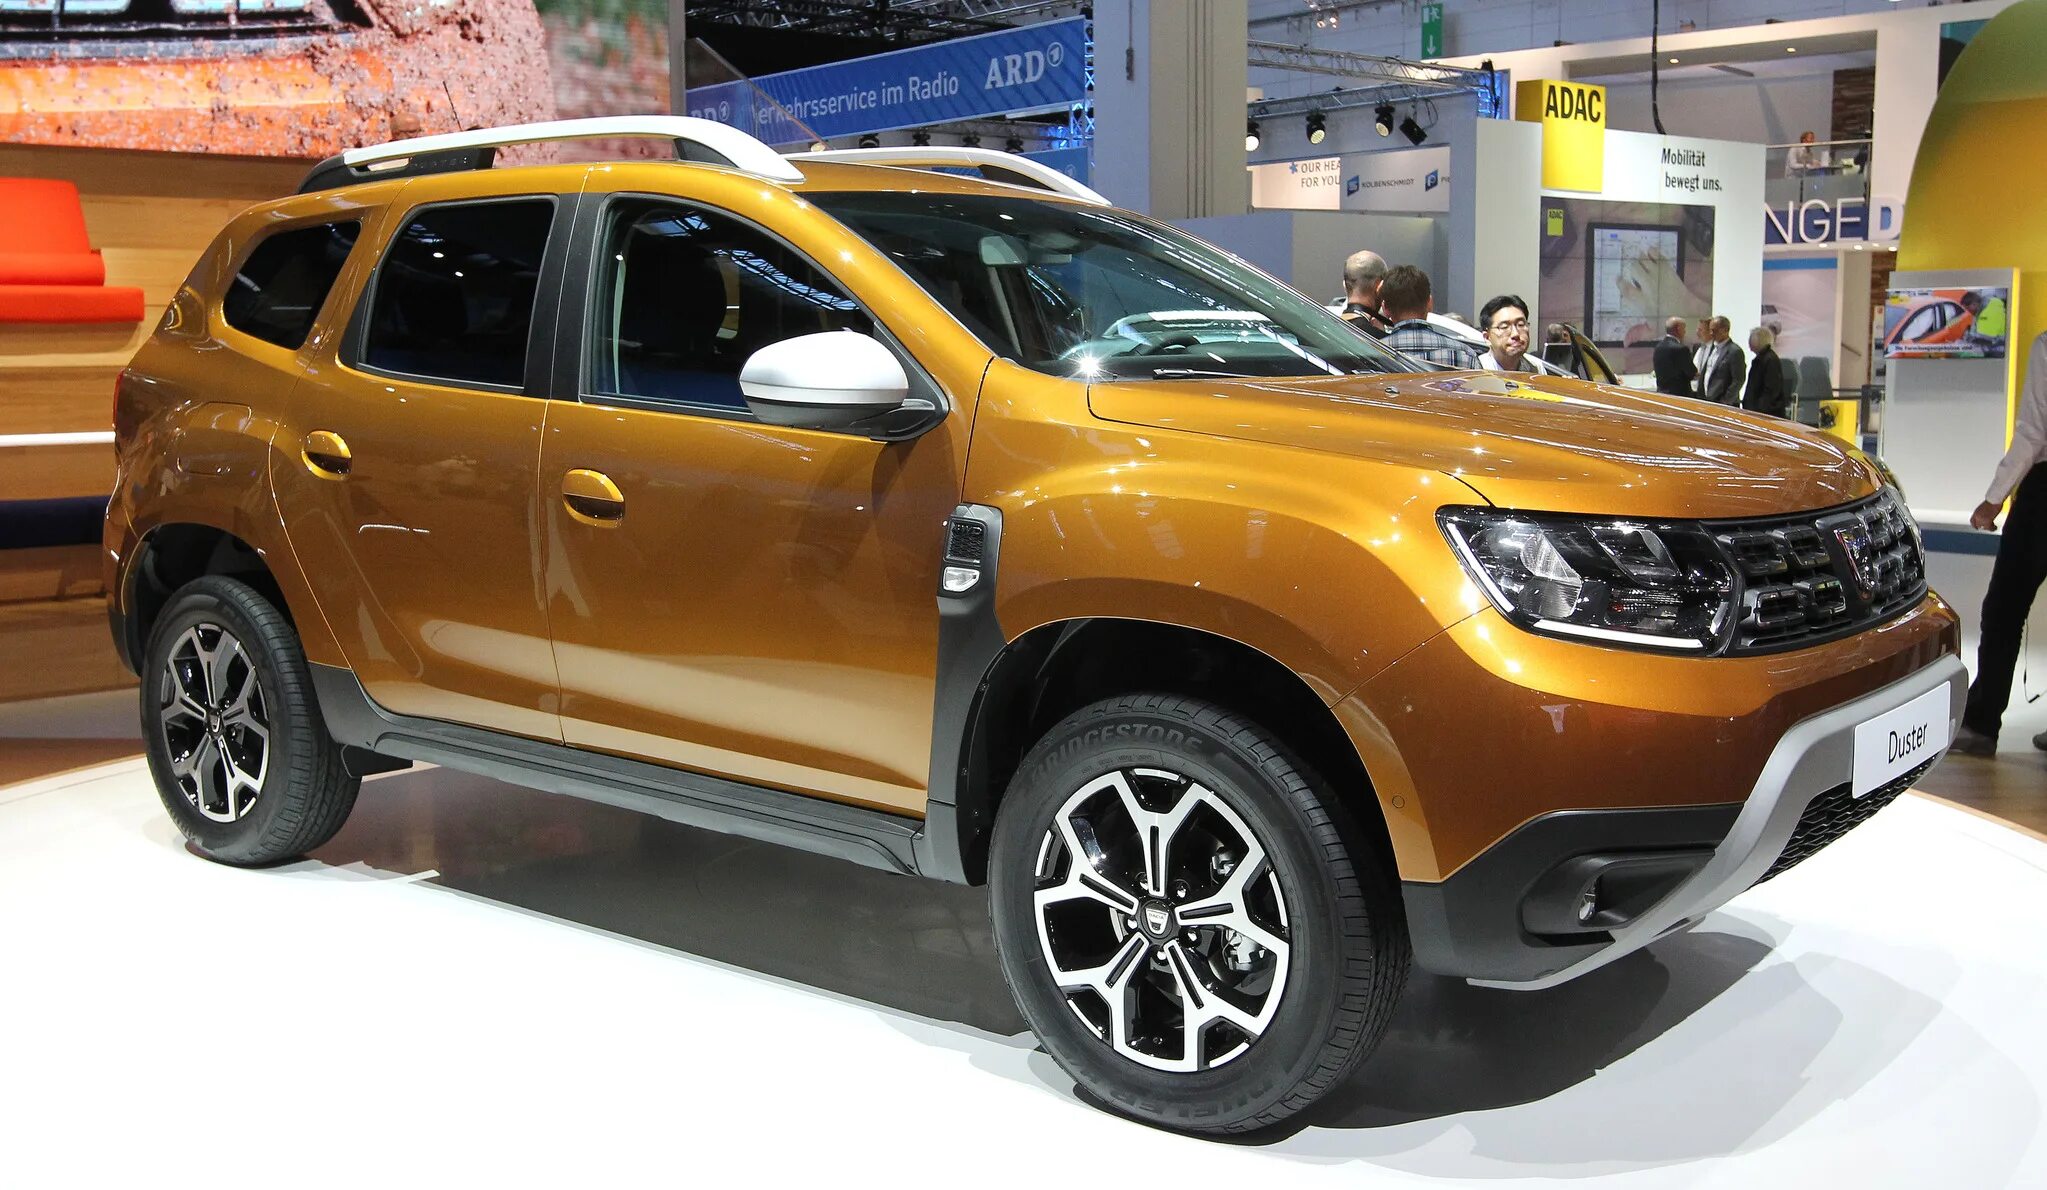 Renault Duster 2020. Рено Дастер 2021. Рено Дастер 2020г. Дачия Дастер 2023. Купить дастер 2020 года